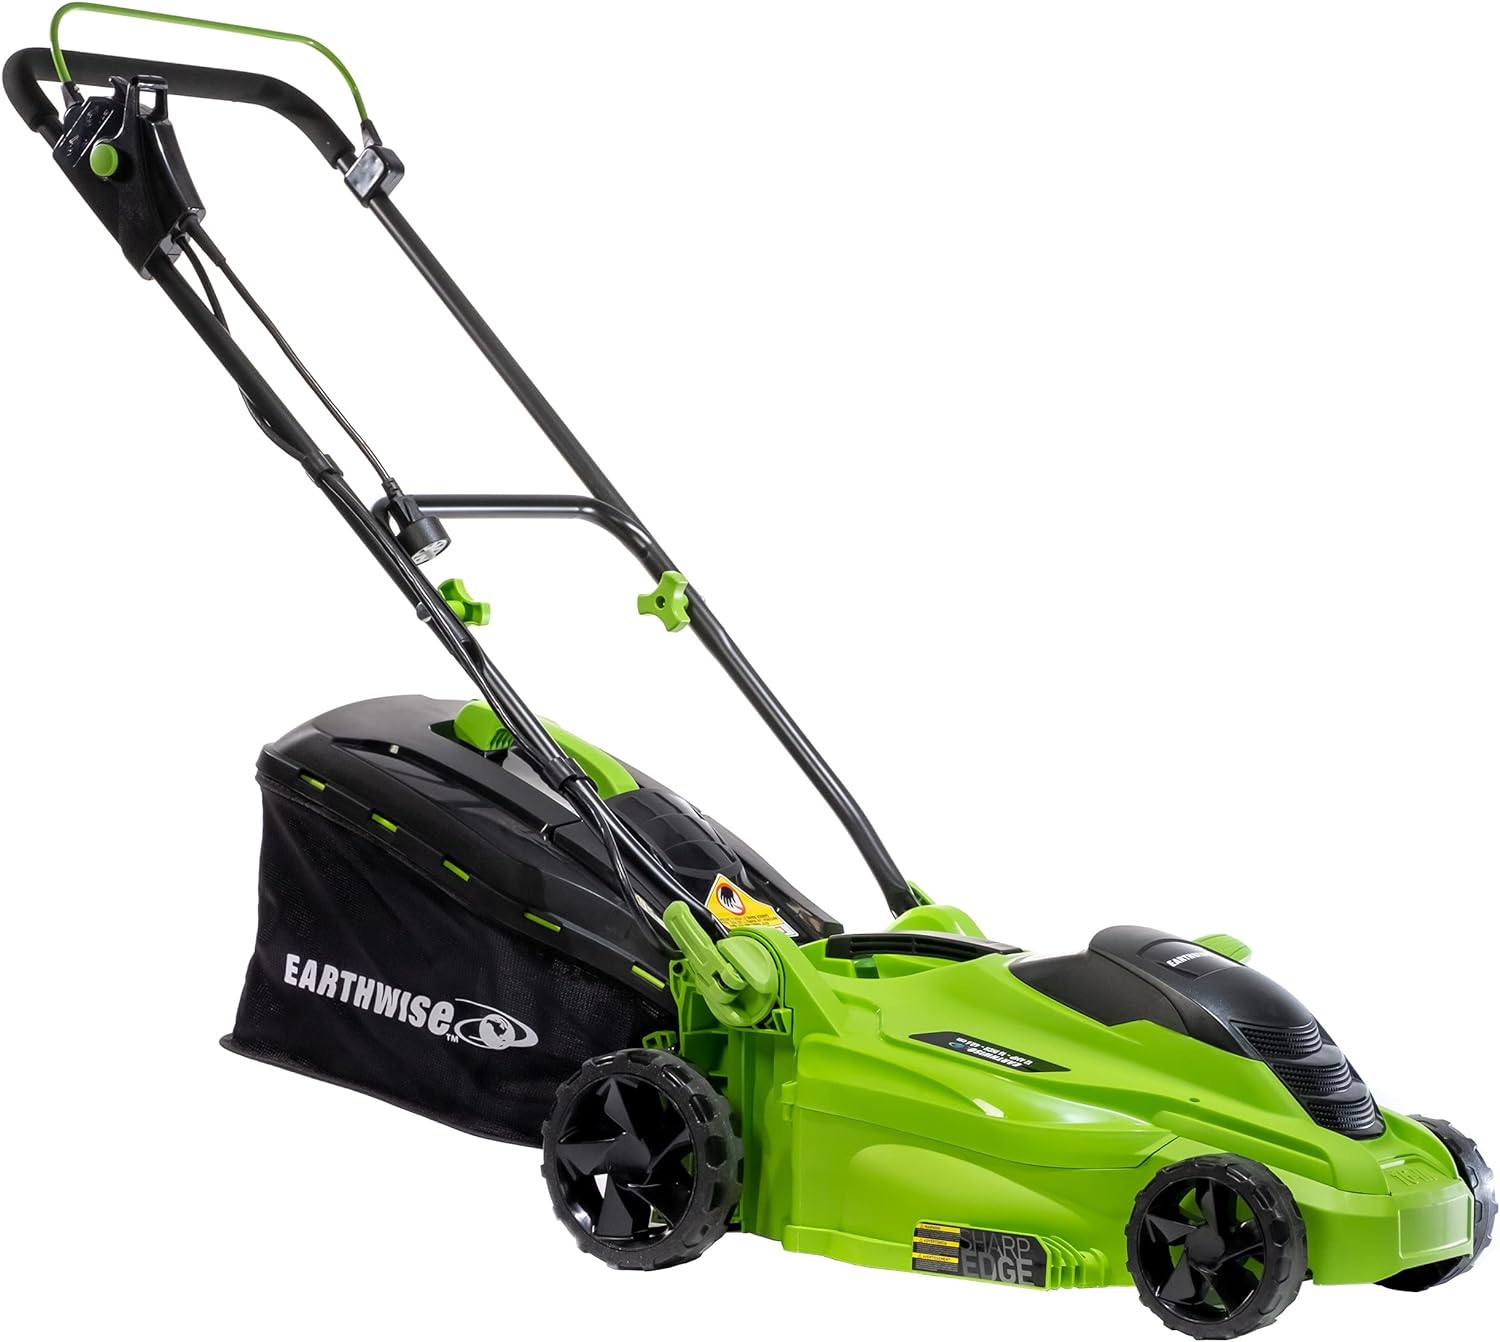 Earthwise 16-Inch 11-Amp Corded Electric Walk-Behind Lawn Mower 16-Inch, 11-Amp